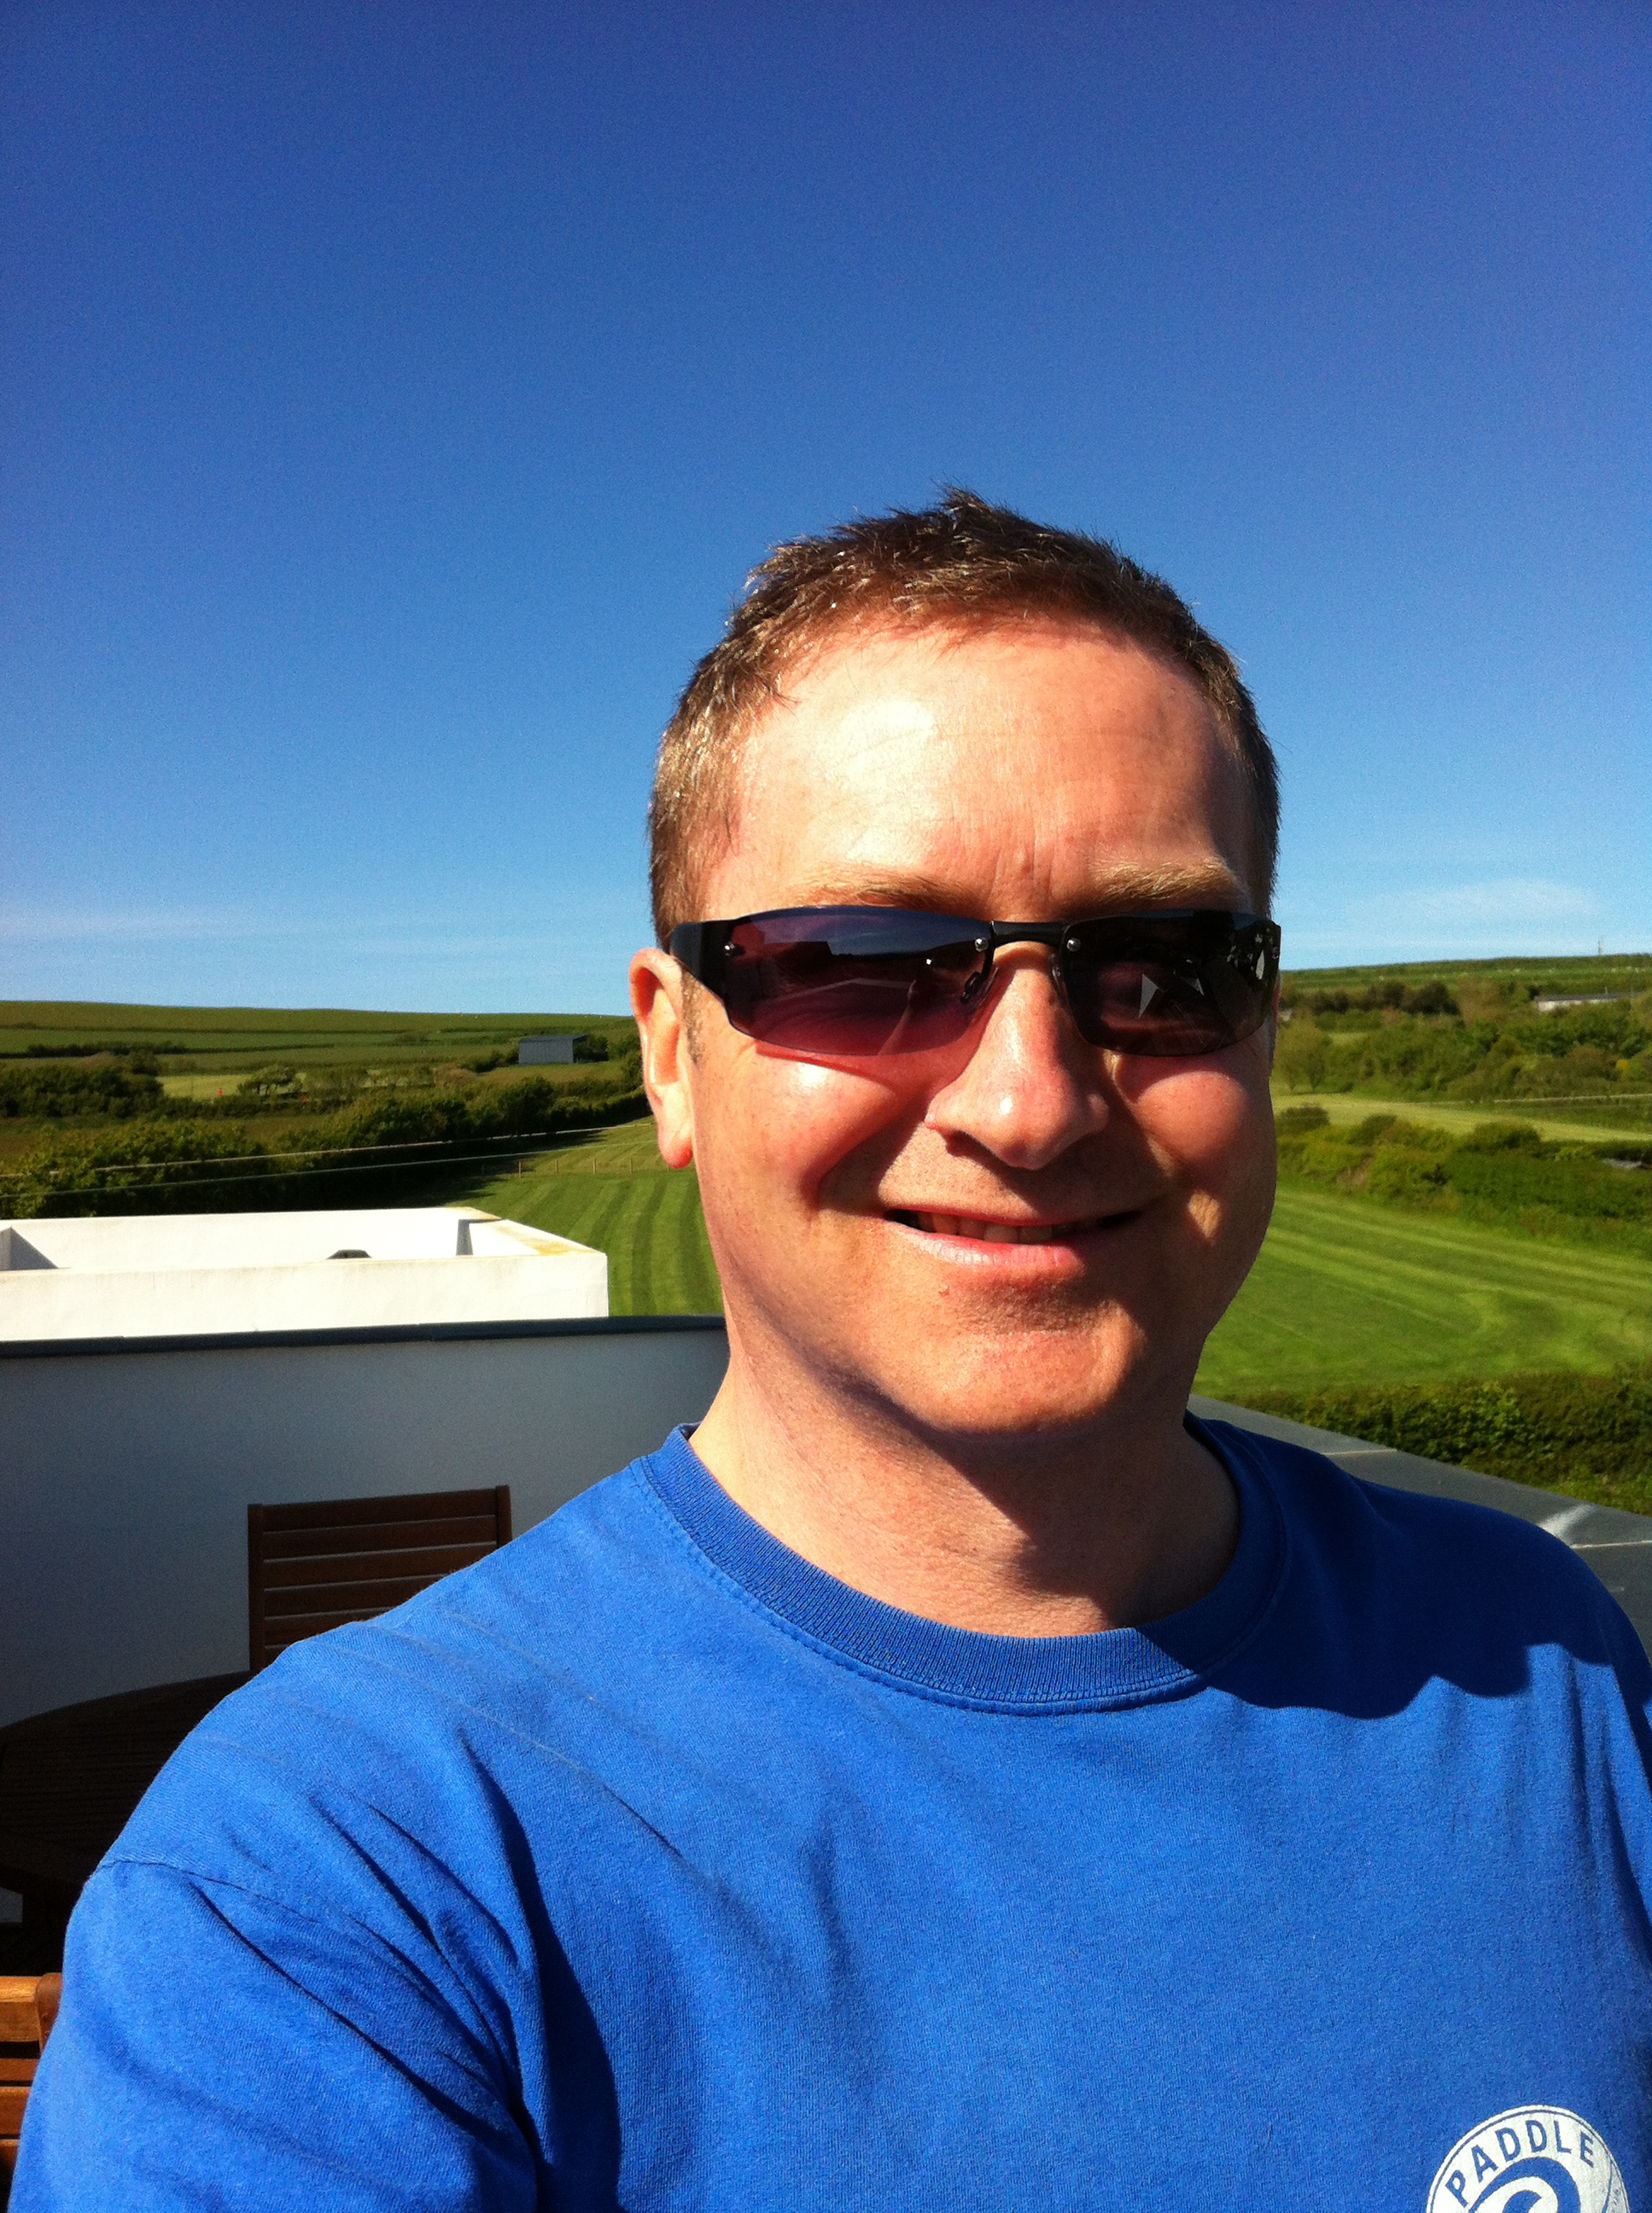 On the balcony in Croyde after a close shave..